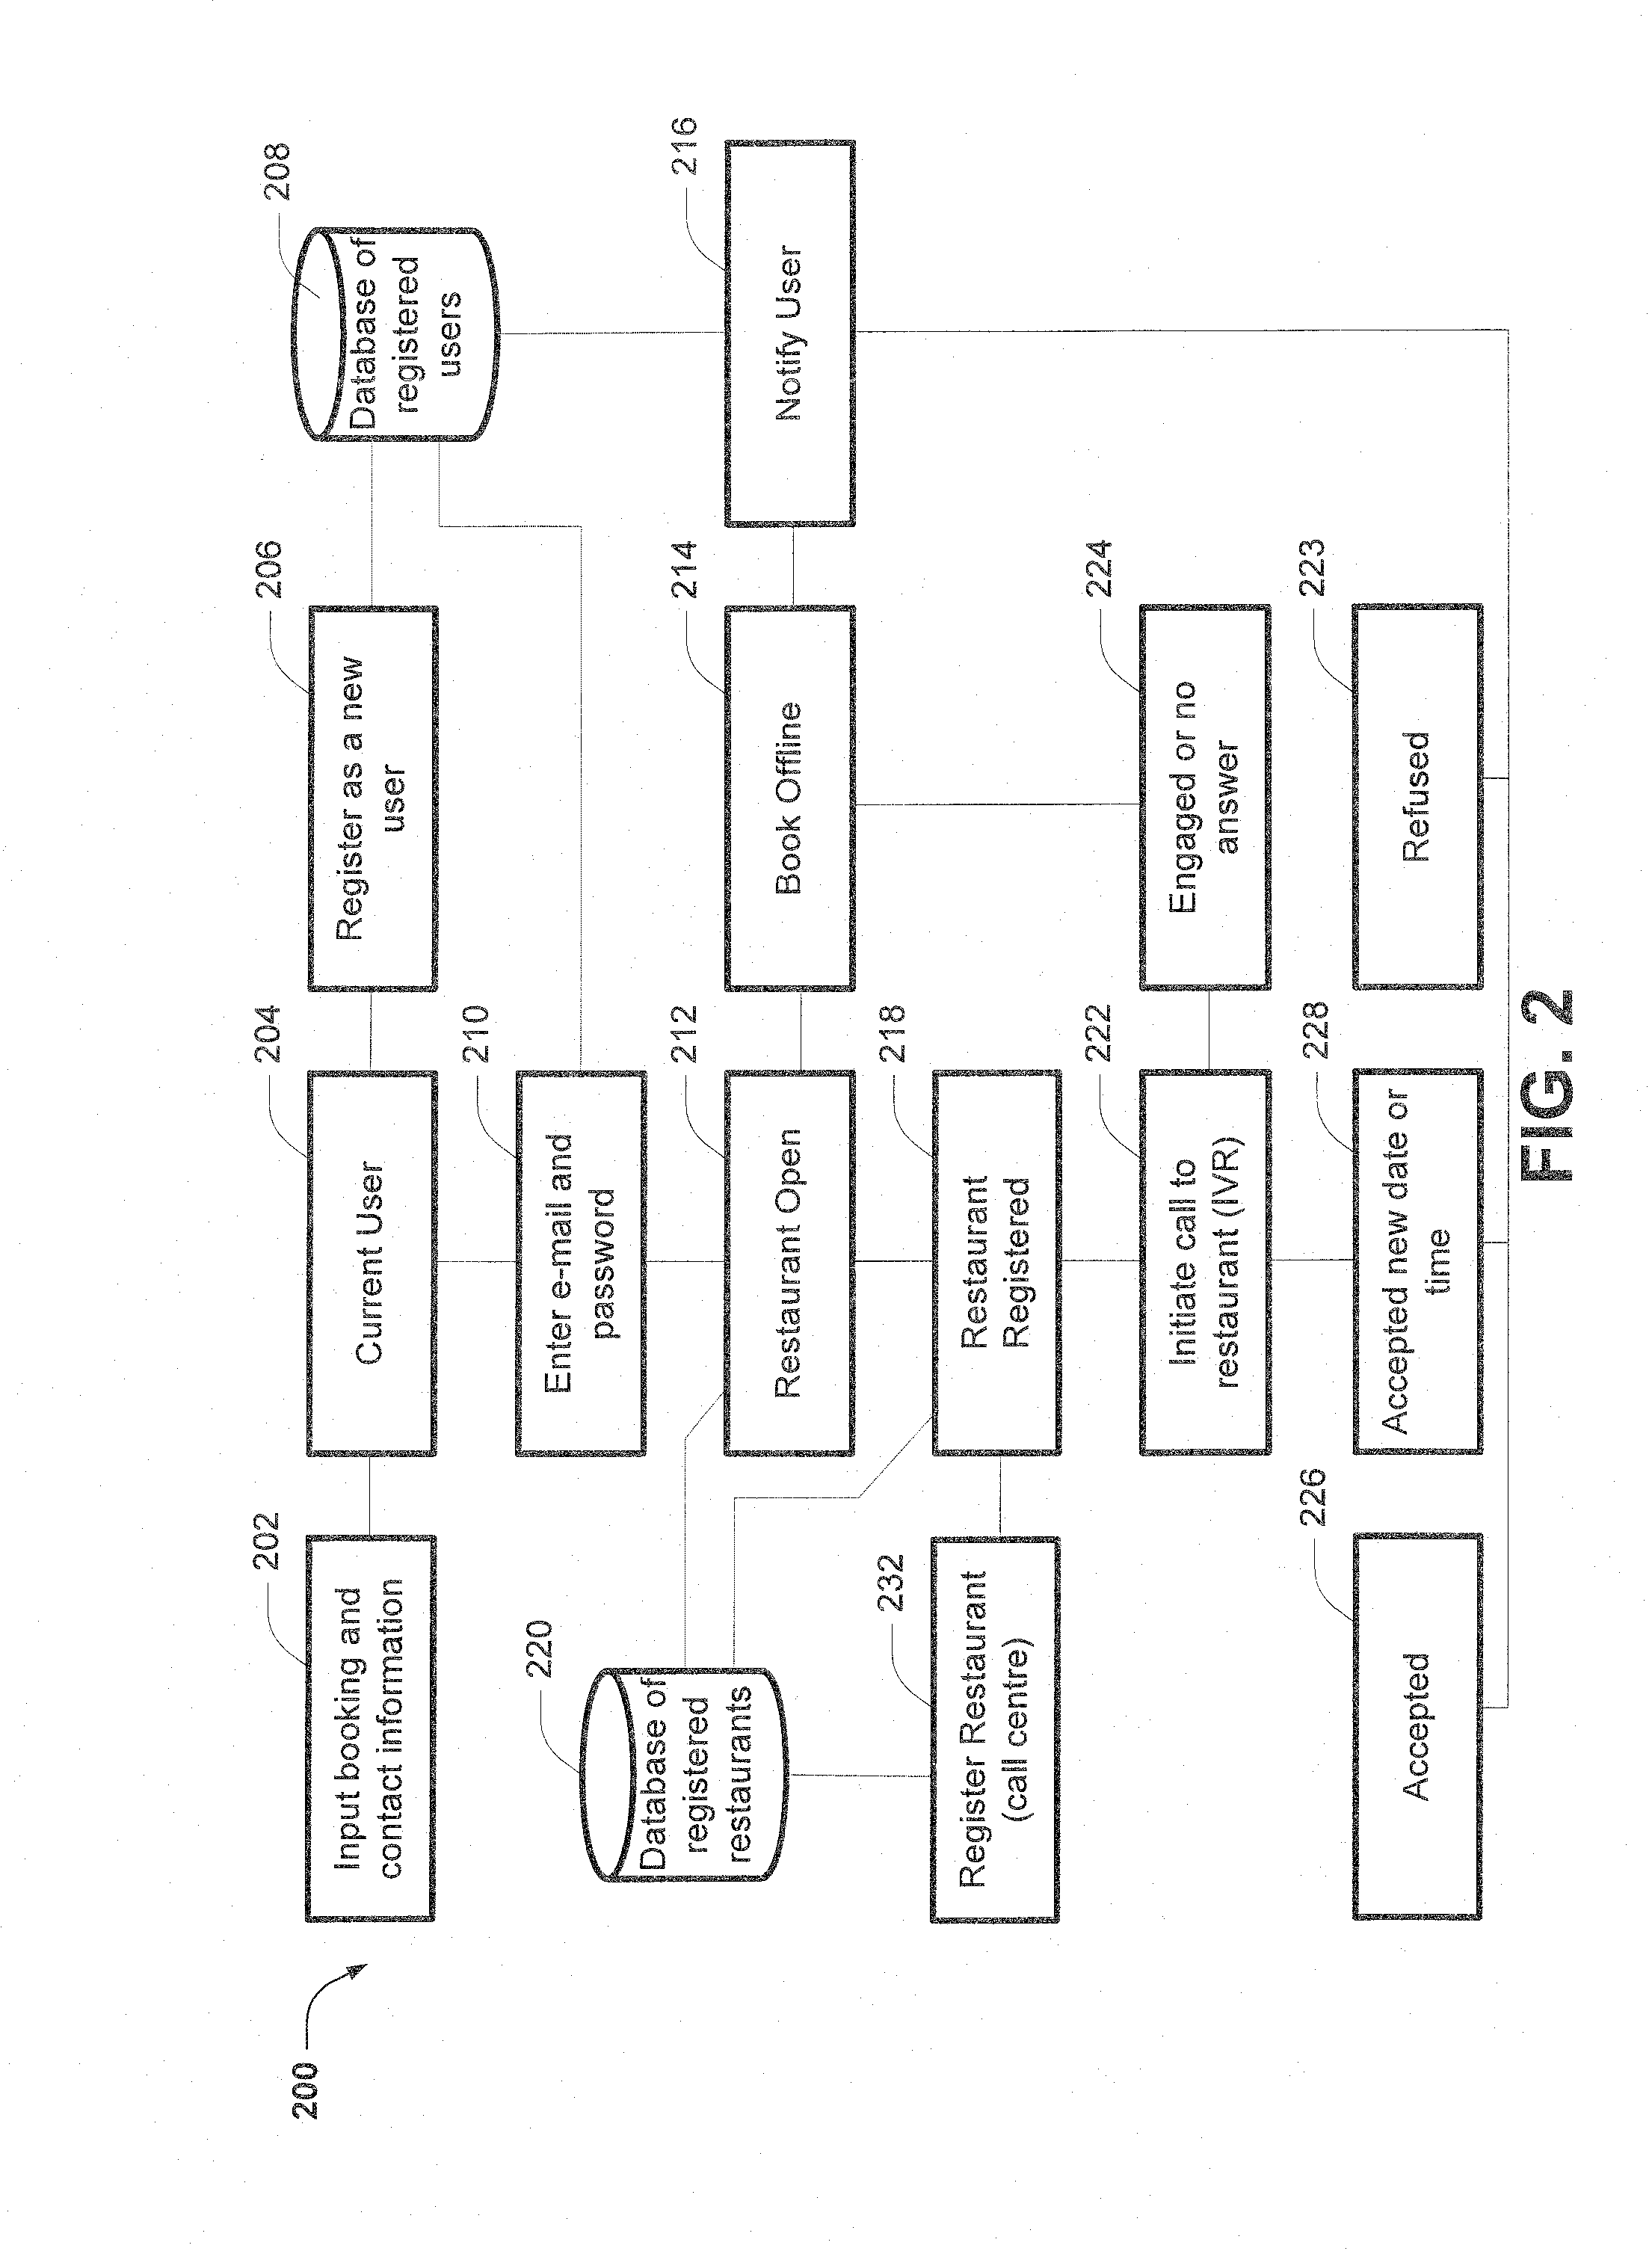 Booking System and Method